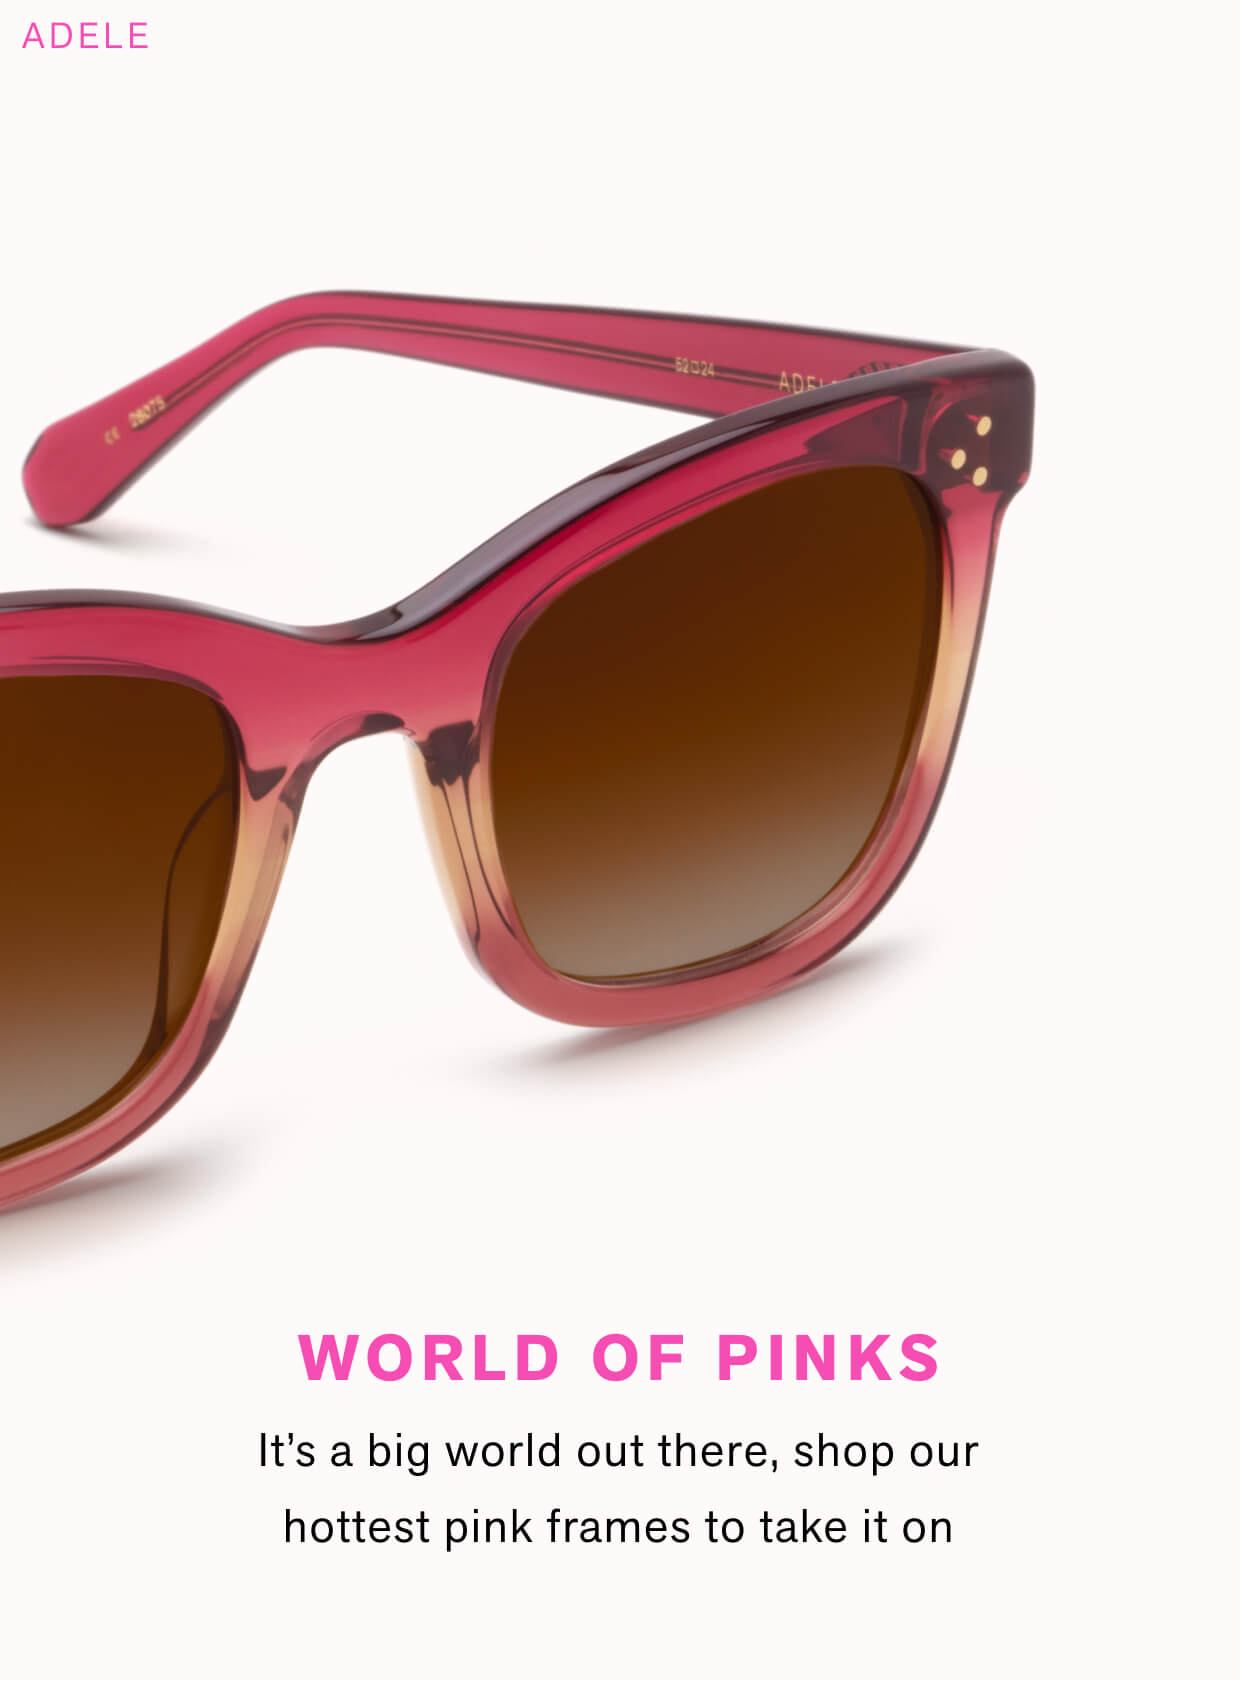 World of Pinks  It's a big world out there, shop our hottest pink frames to take it on